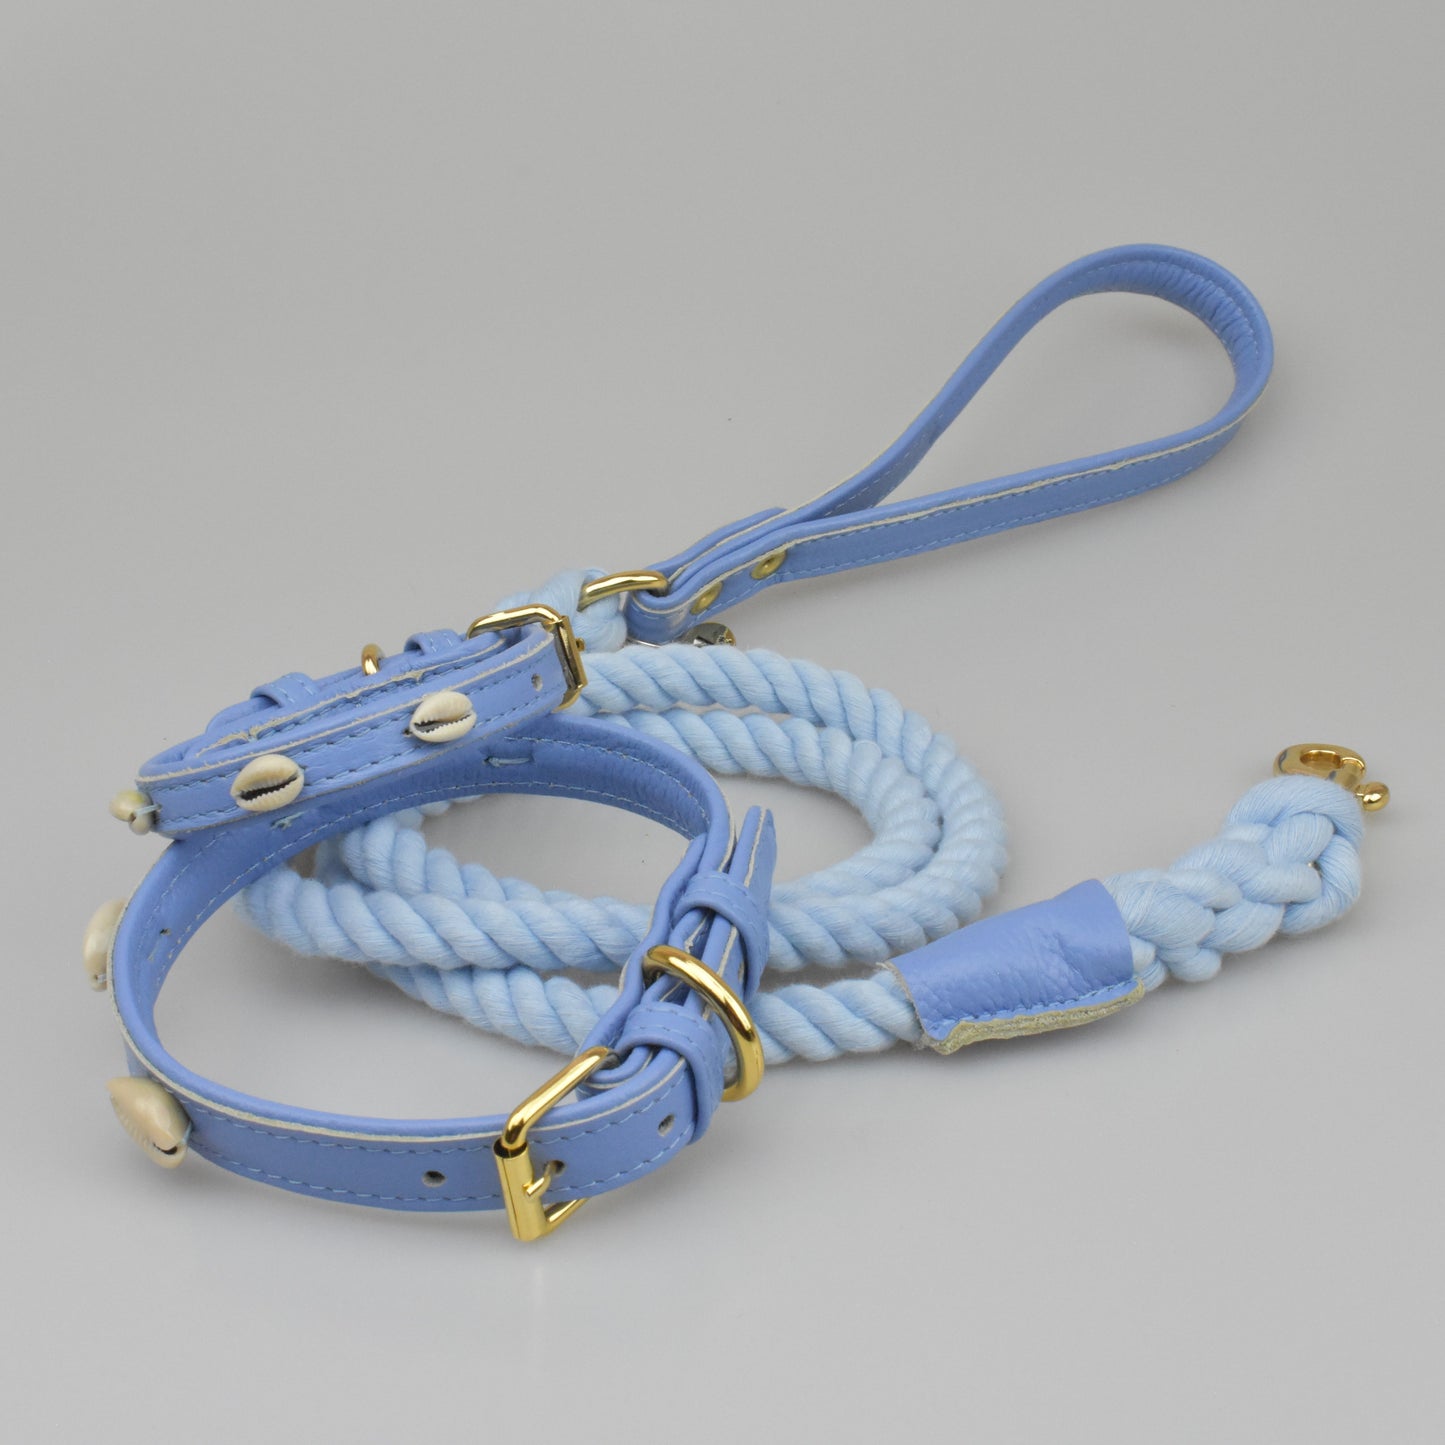 Willow Walks leather collar in cornflower blue with shell detail